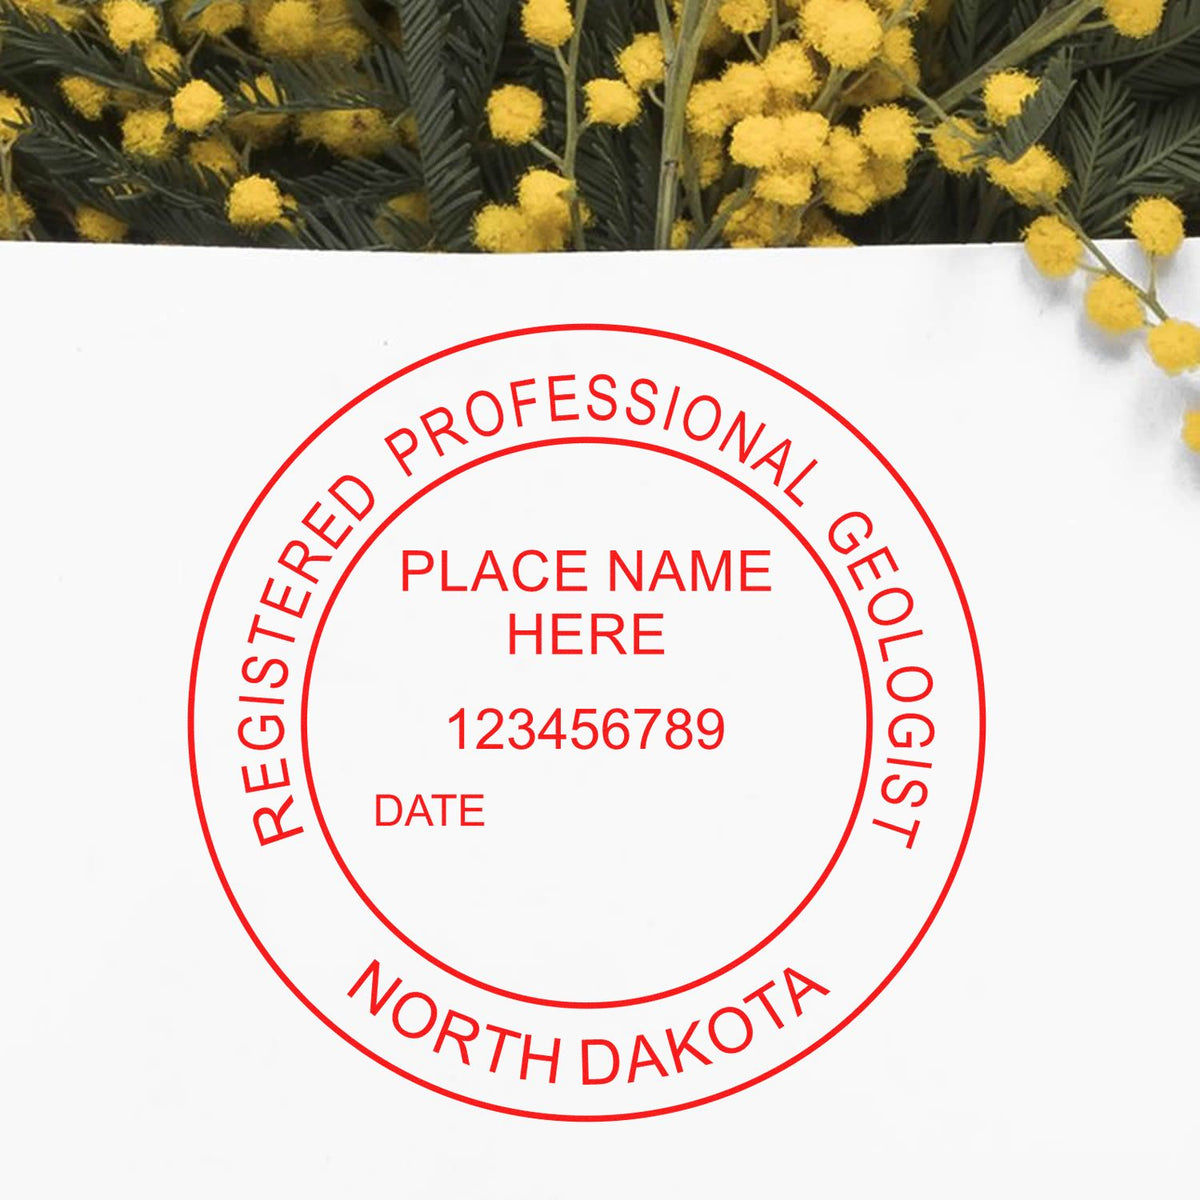 The Premium MaxLight Pre-Inked North Dakota Geology Stamp stamp impression comes to life with a crisp, detailed image stamped on paper - showcasing true professional quality.